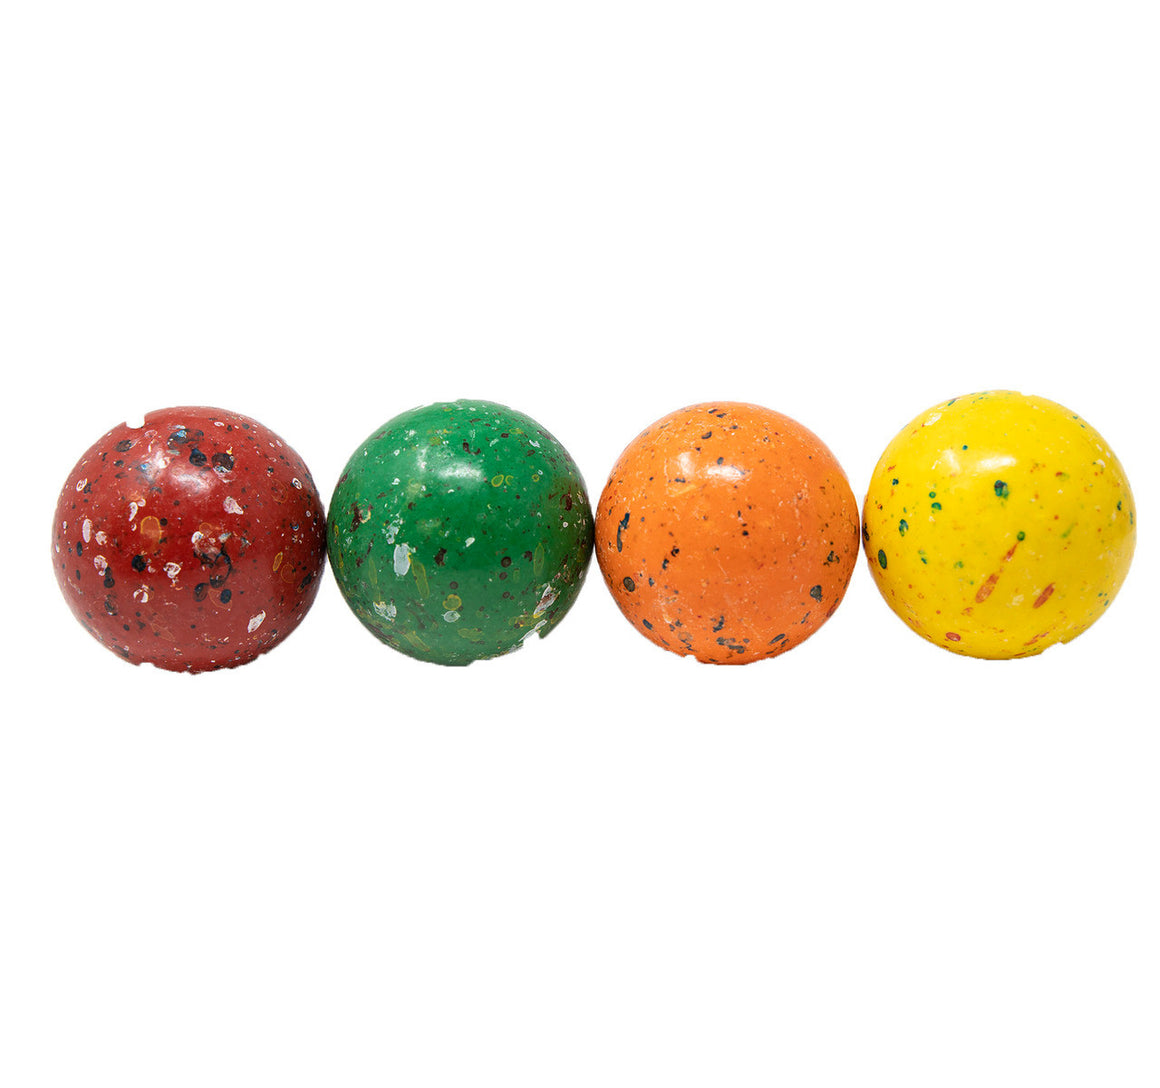 All City Candy Bruisers Psychedelic Wrapped Jawbreakers 2 1/4" - 3 LB Bulk Sconza Candy For fresh candy and great service, visit www.allcitycandy.com